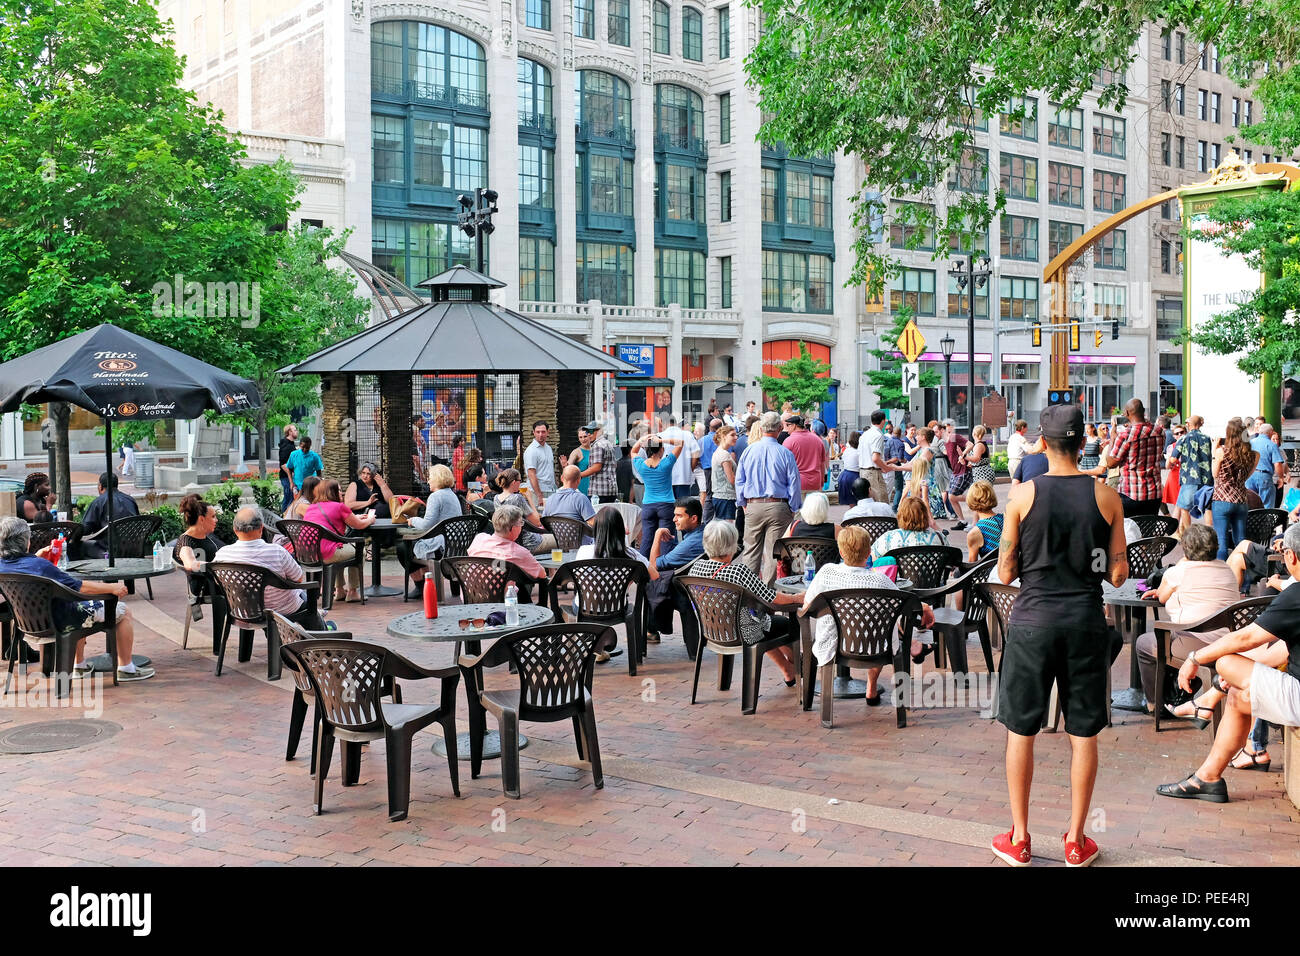 Summertime 'Dancing Under the Stars' Tuesday night program attracts people to the theater district for outdoor dancing to a live band in Cleveland USA Stock Photo